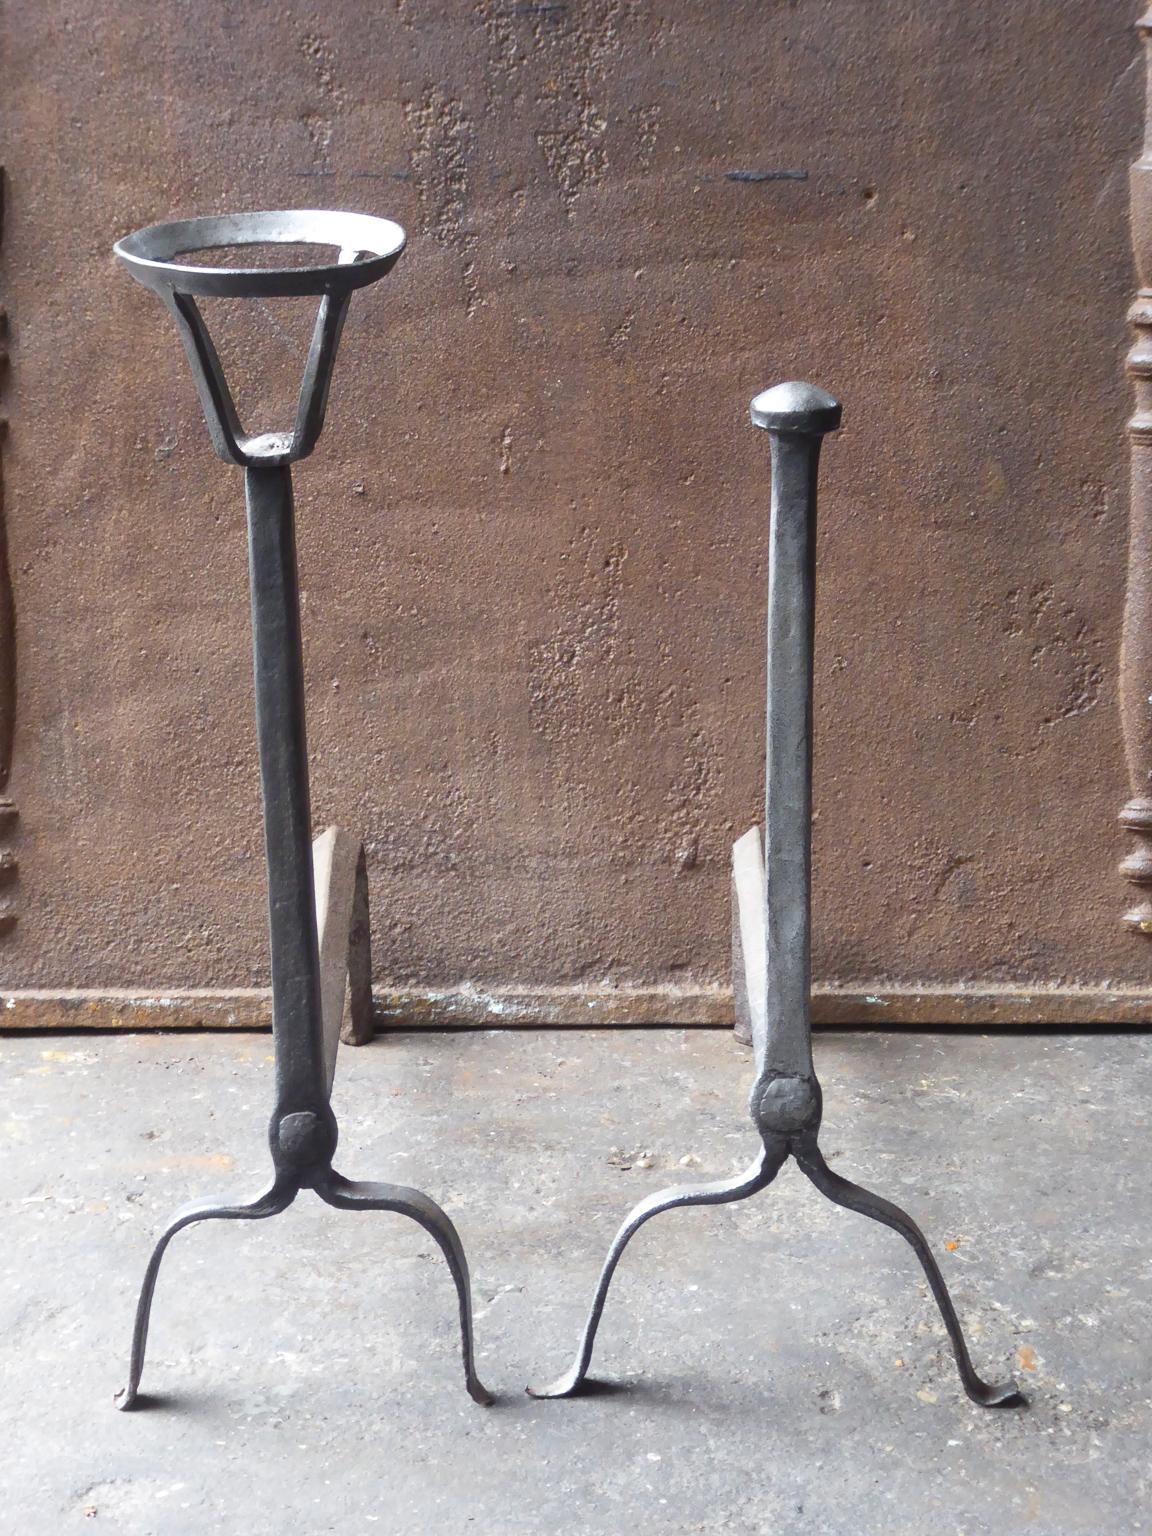 17th-18th century French andirons made of wrought iron. The style of the andirons is gothic. The andirons have spit hooks to grill food. Wedding pair whereby both parties donate one andiron from the same blacksmith. The condition is good.